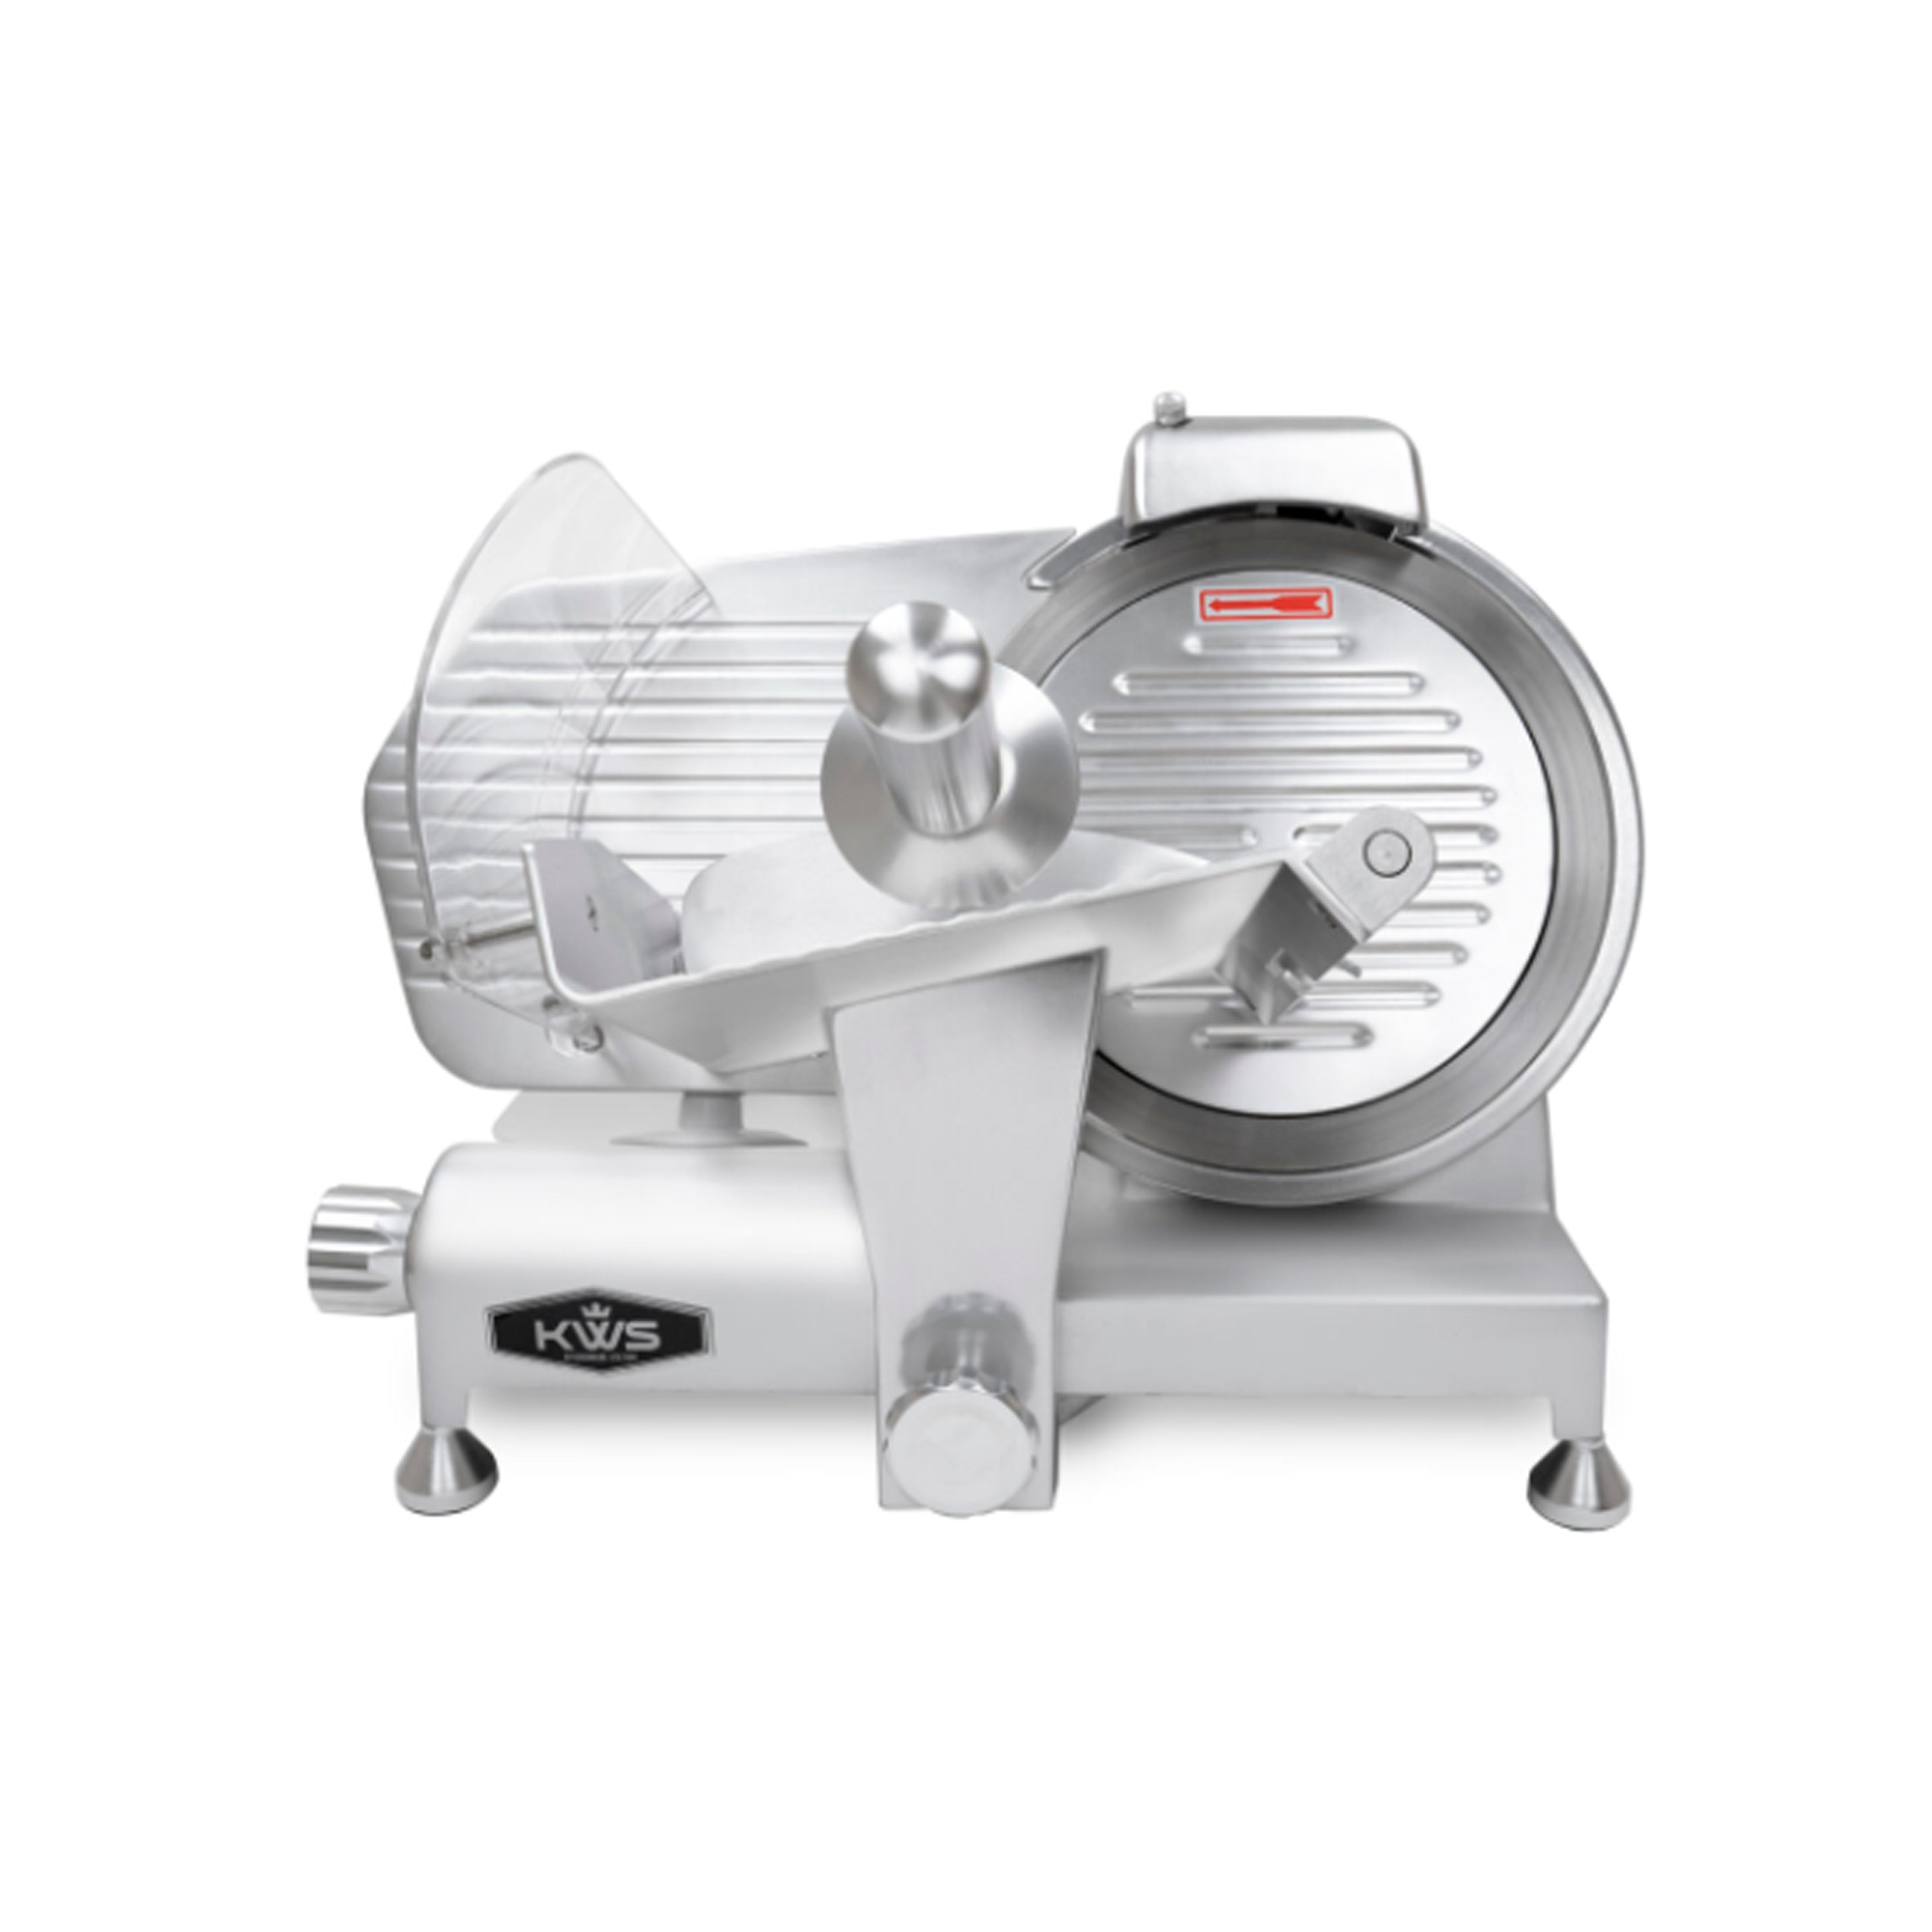 KWS - MS-10ES, Commercial 10″ Electric Meat Slicer Metal Collection Stainless Steel Blade